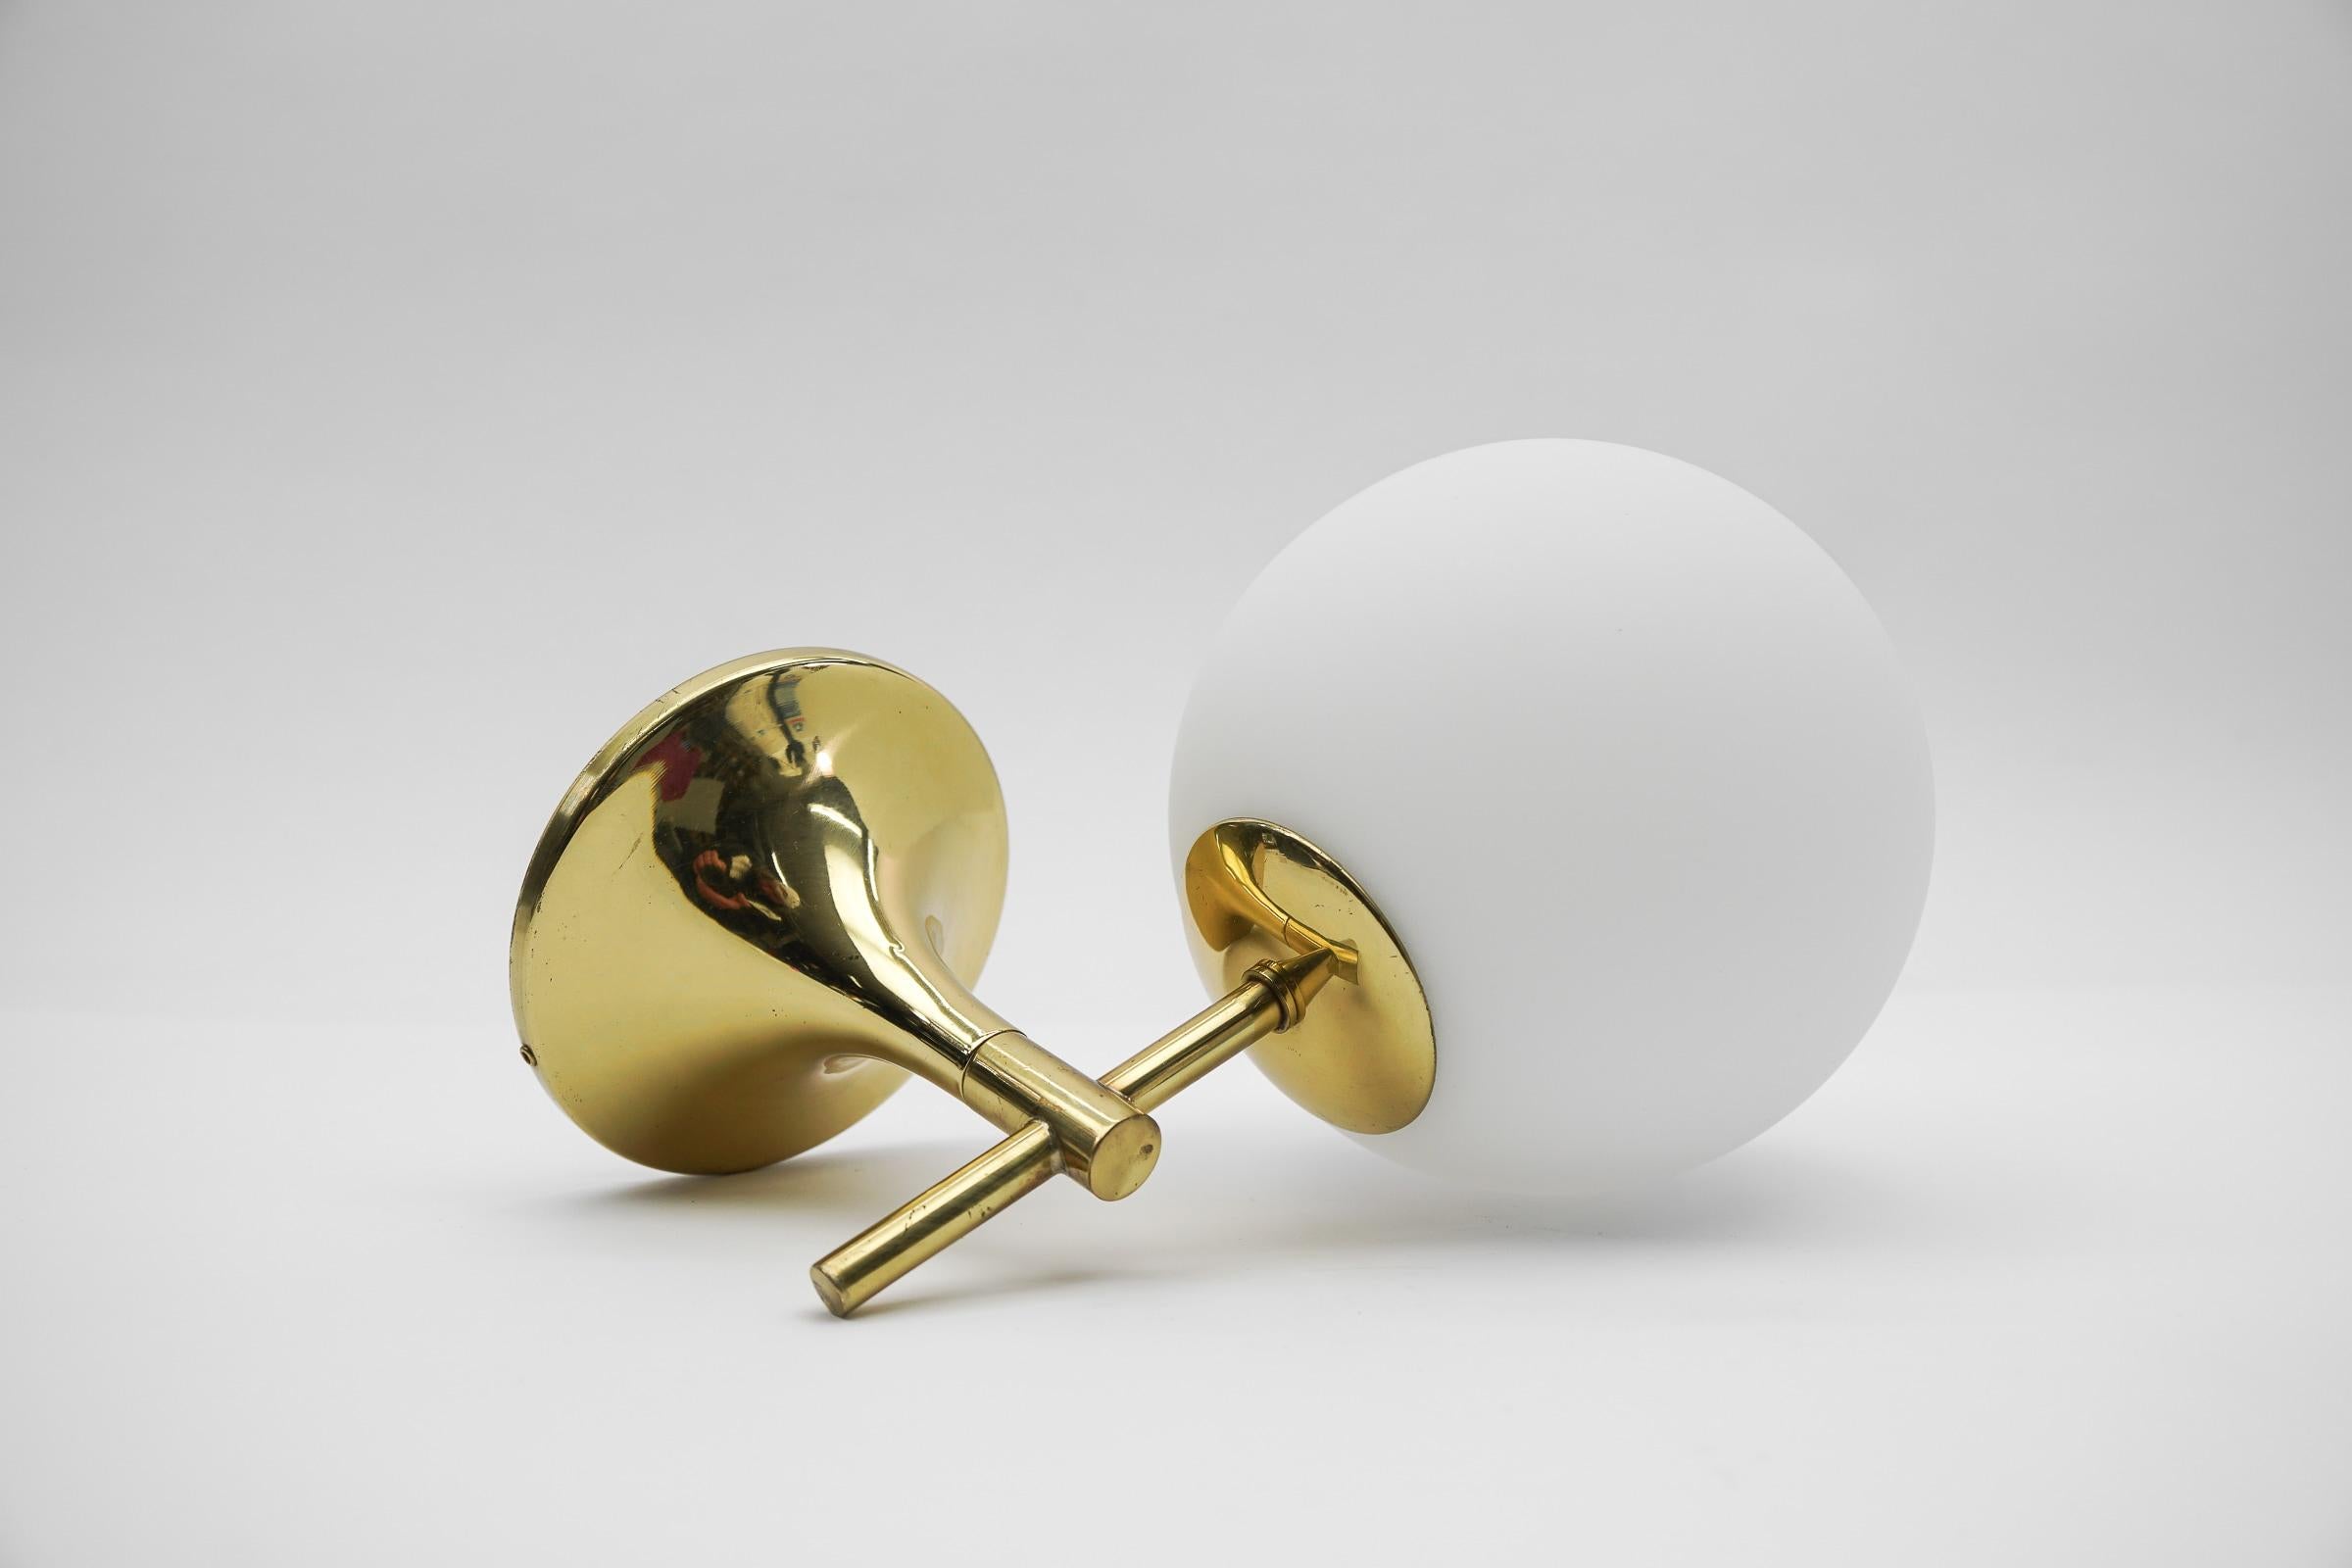 Swiss Rare Wall Light in Gold by Max Bill for Temde, Switzerland, 1960s For Sale